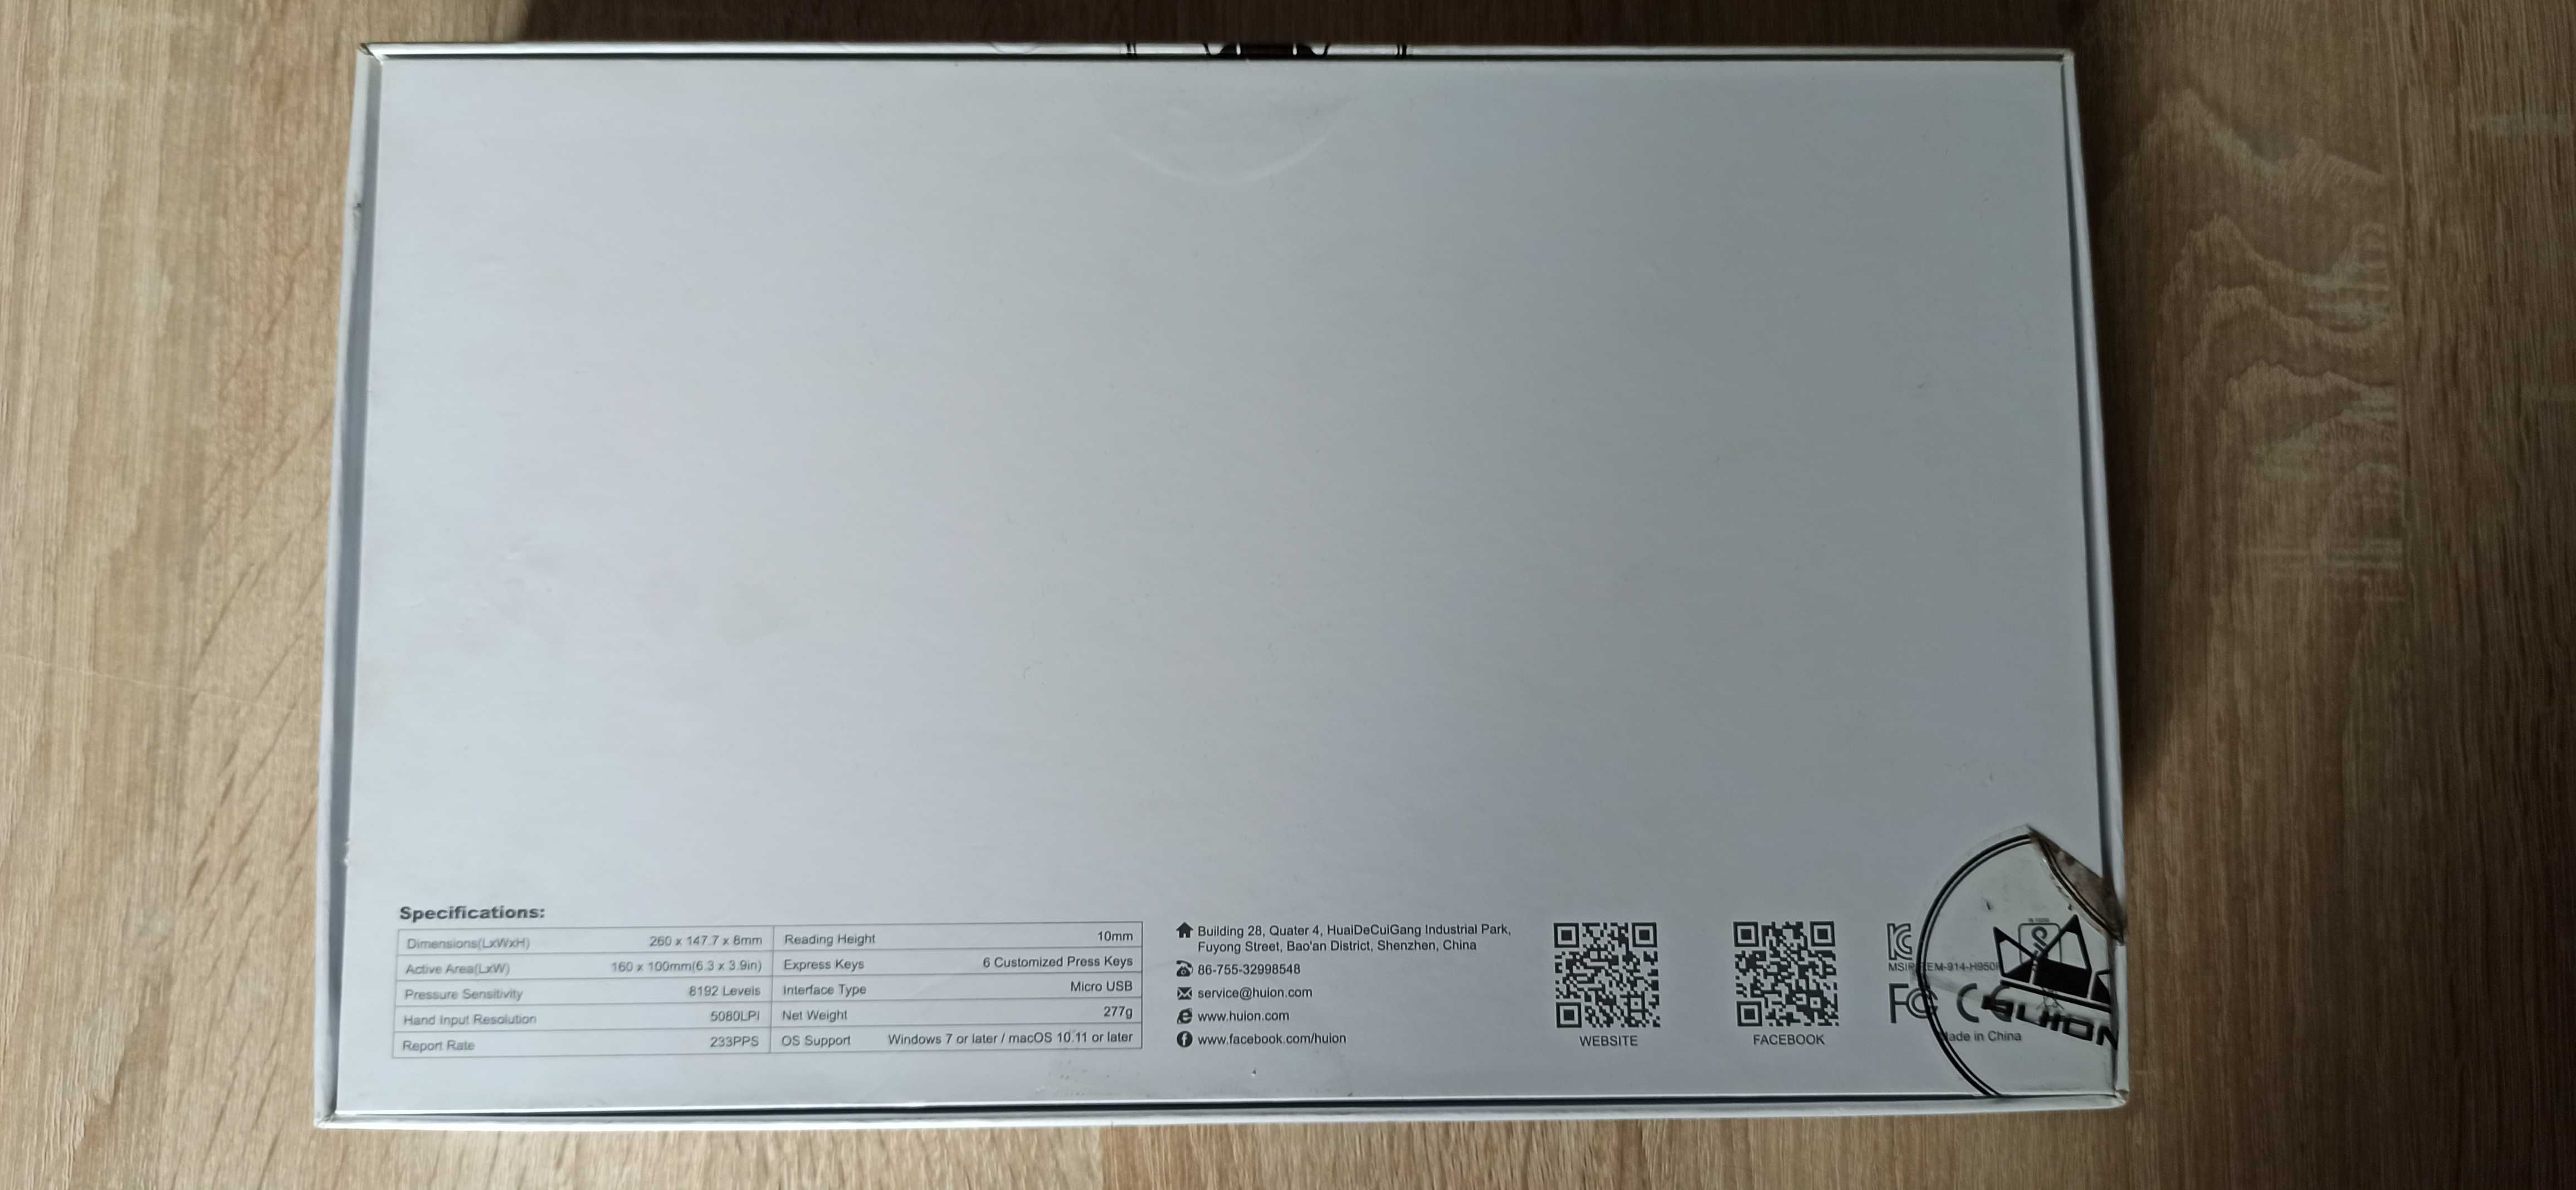 Tablet graficzny Huion  INSPIROY H640P